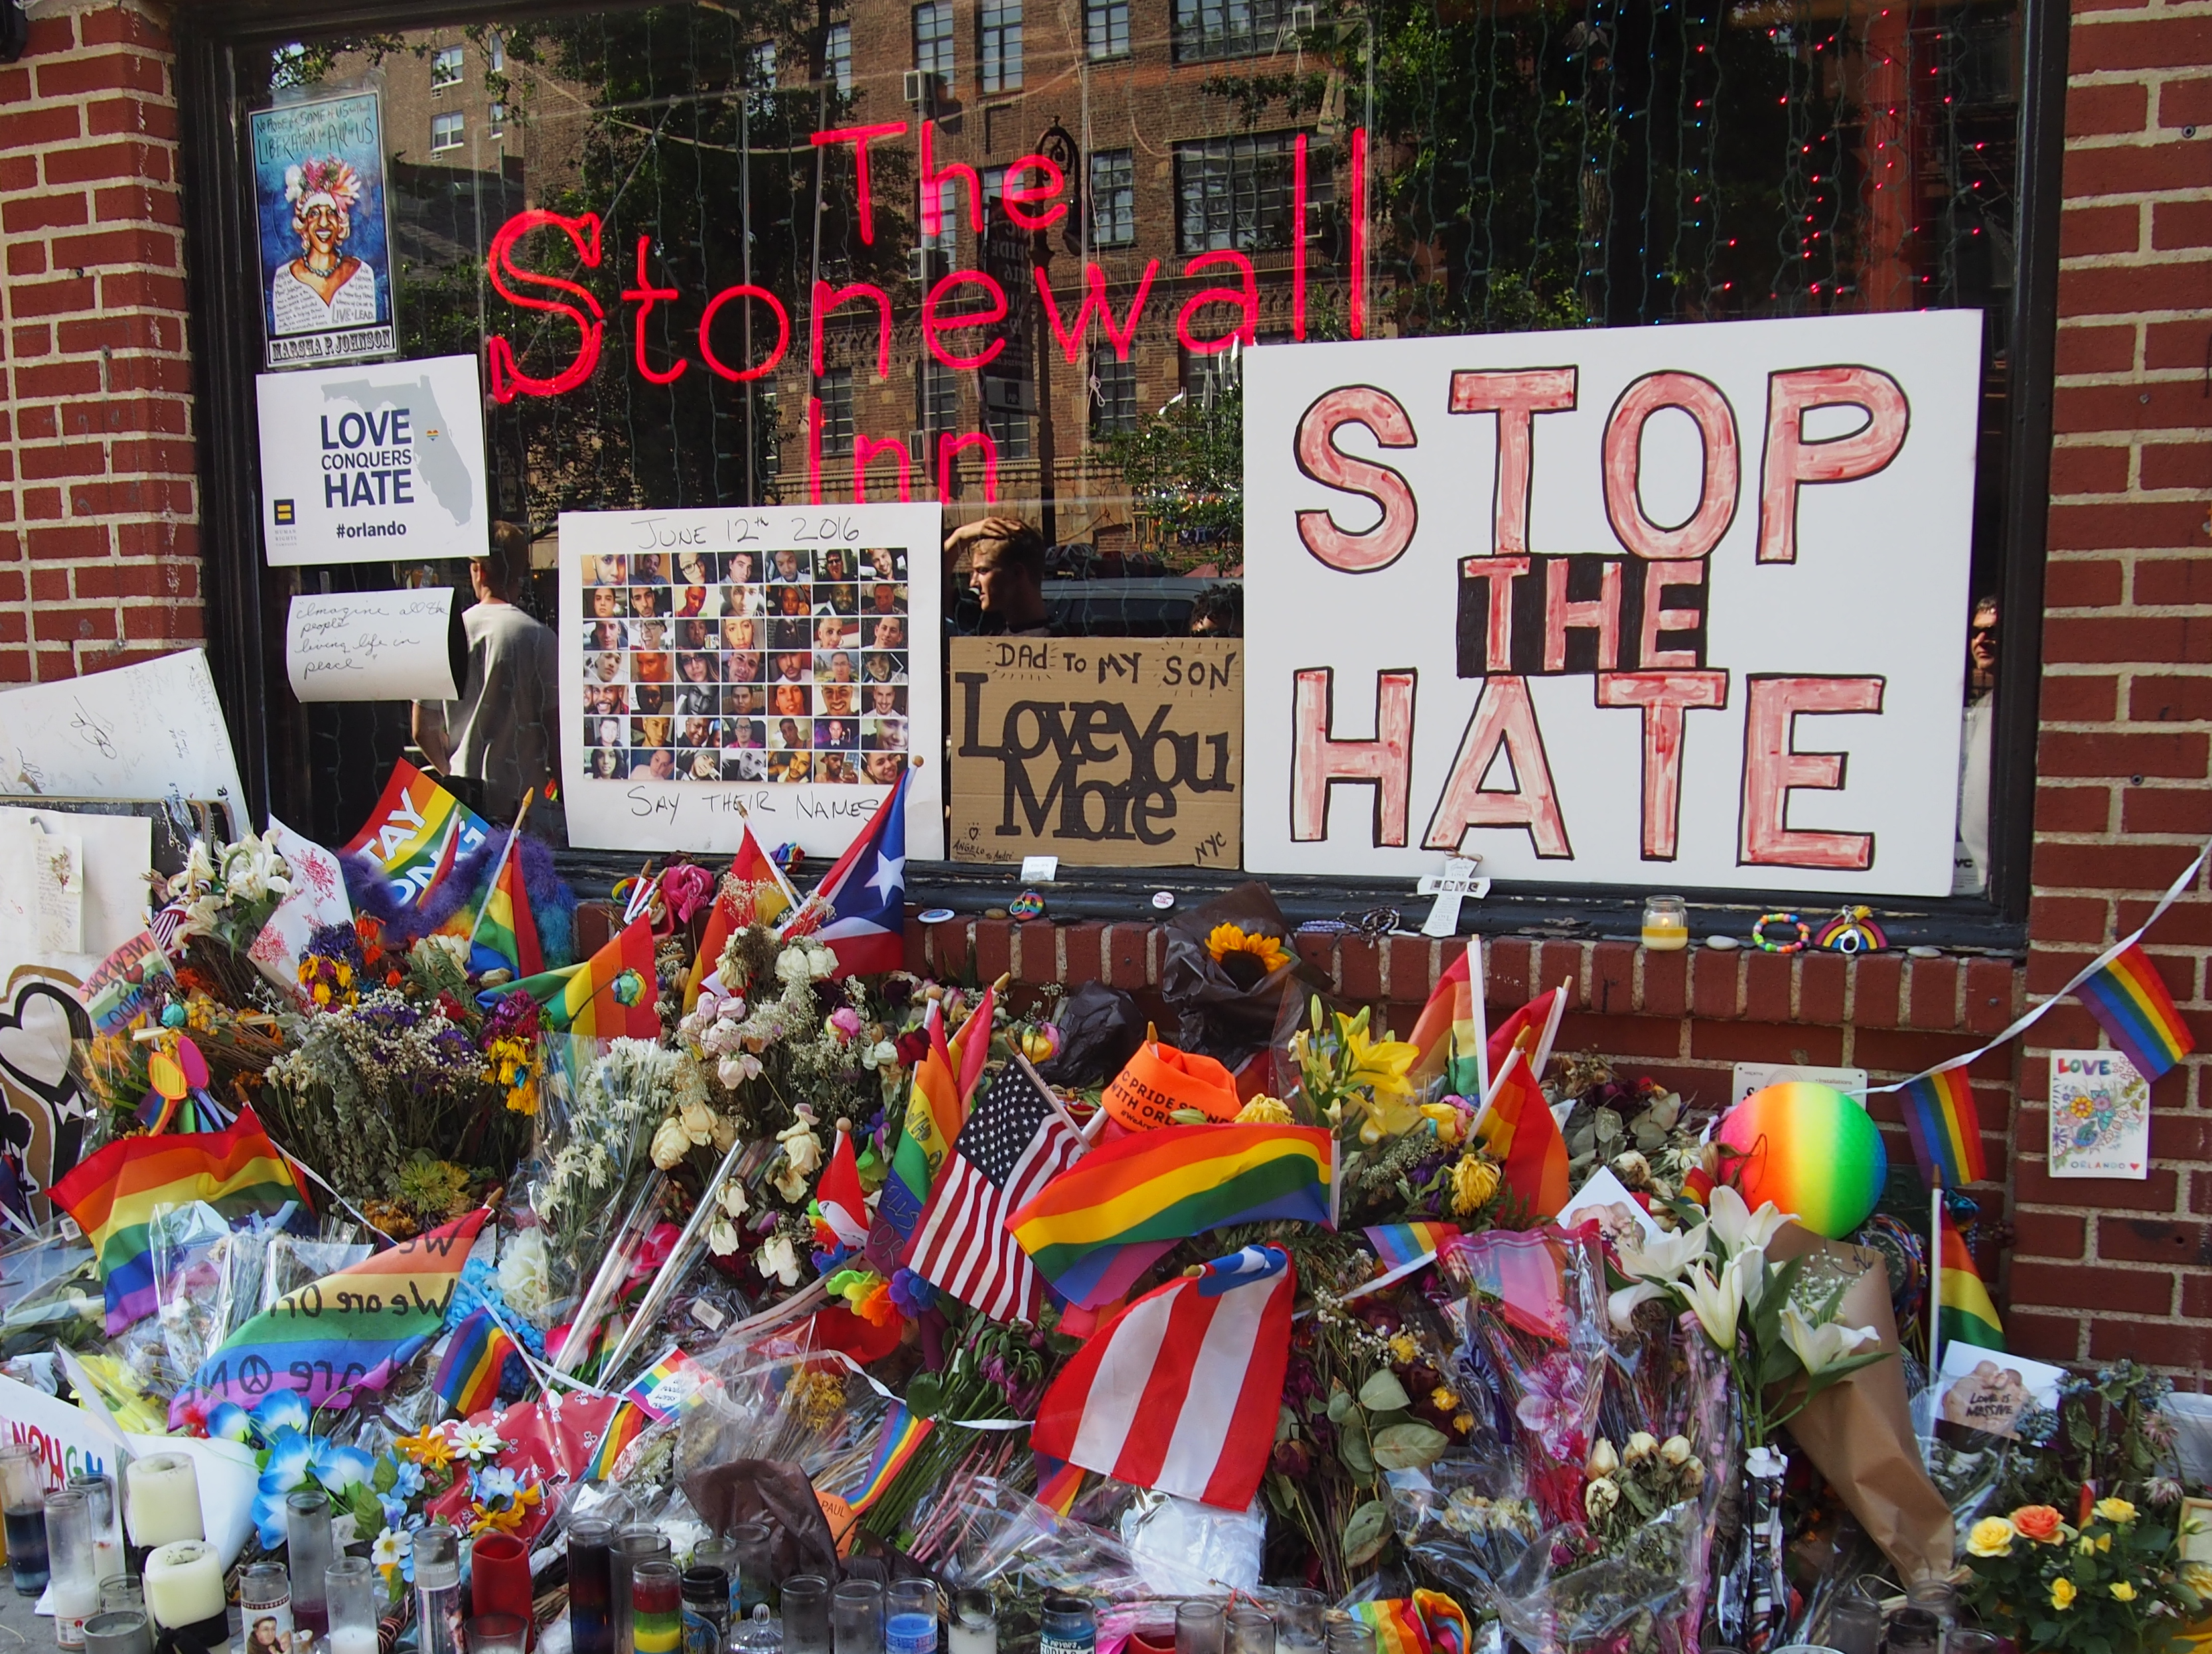 LGBTQ flags, flowers, and signs are laid on the ground outside the Stonewall Inn as a memorial. Some signs read, "Stop the hate" and "Love conquers hate".